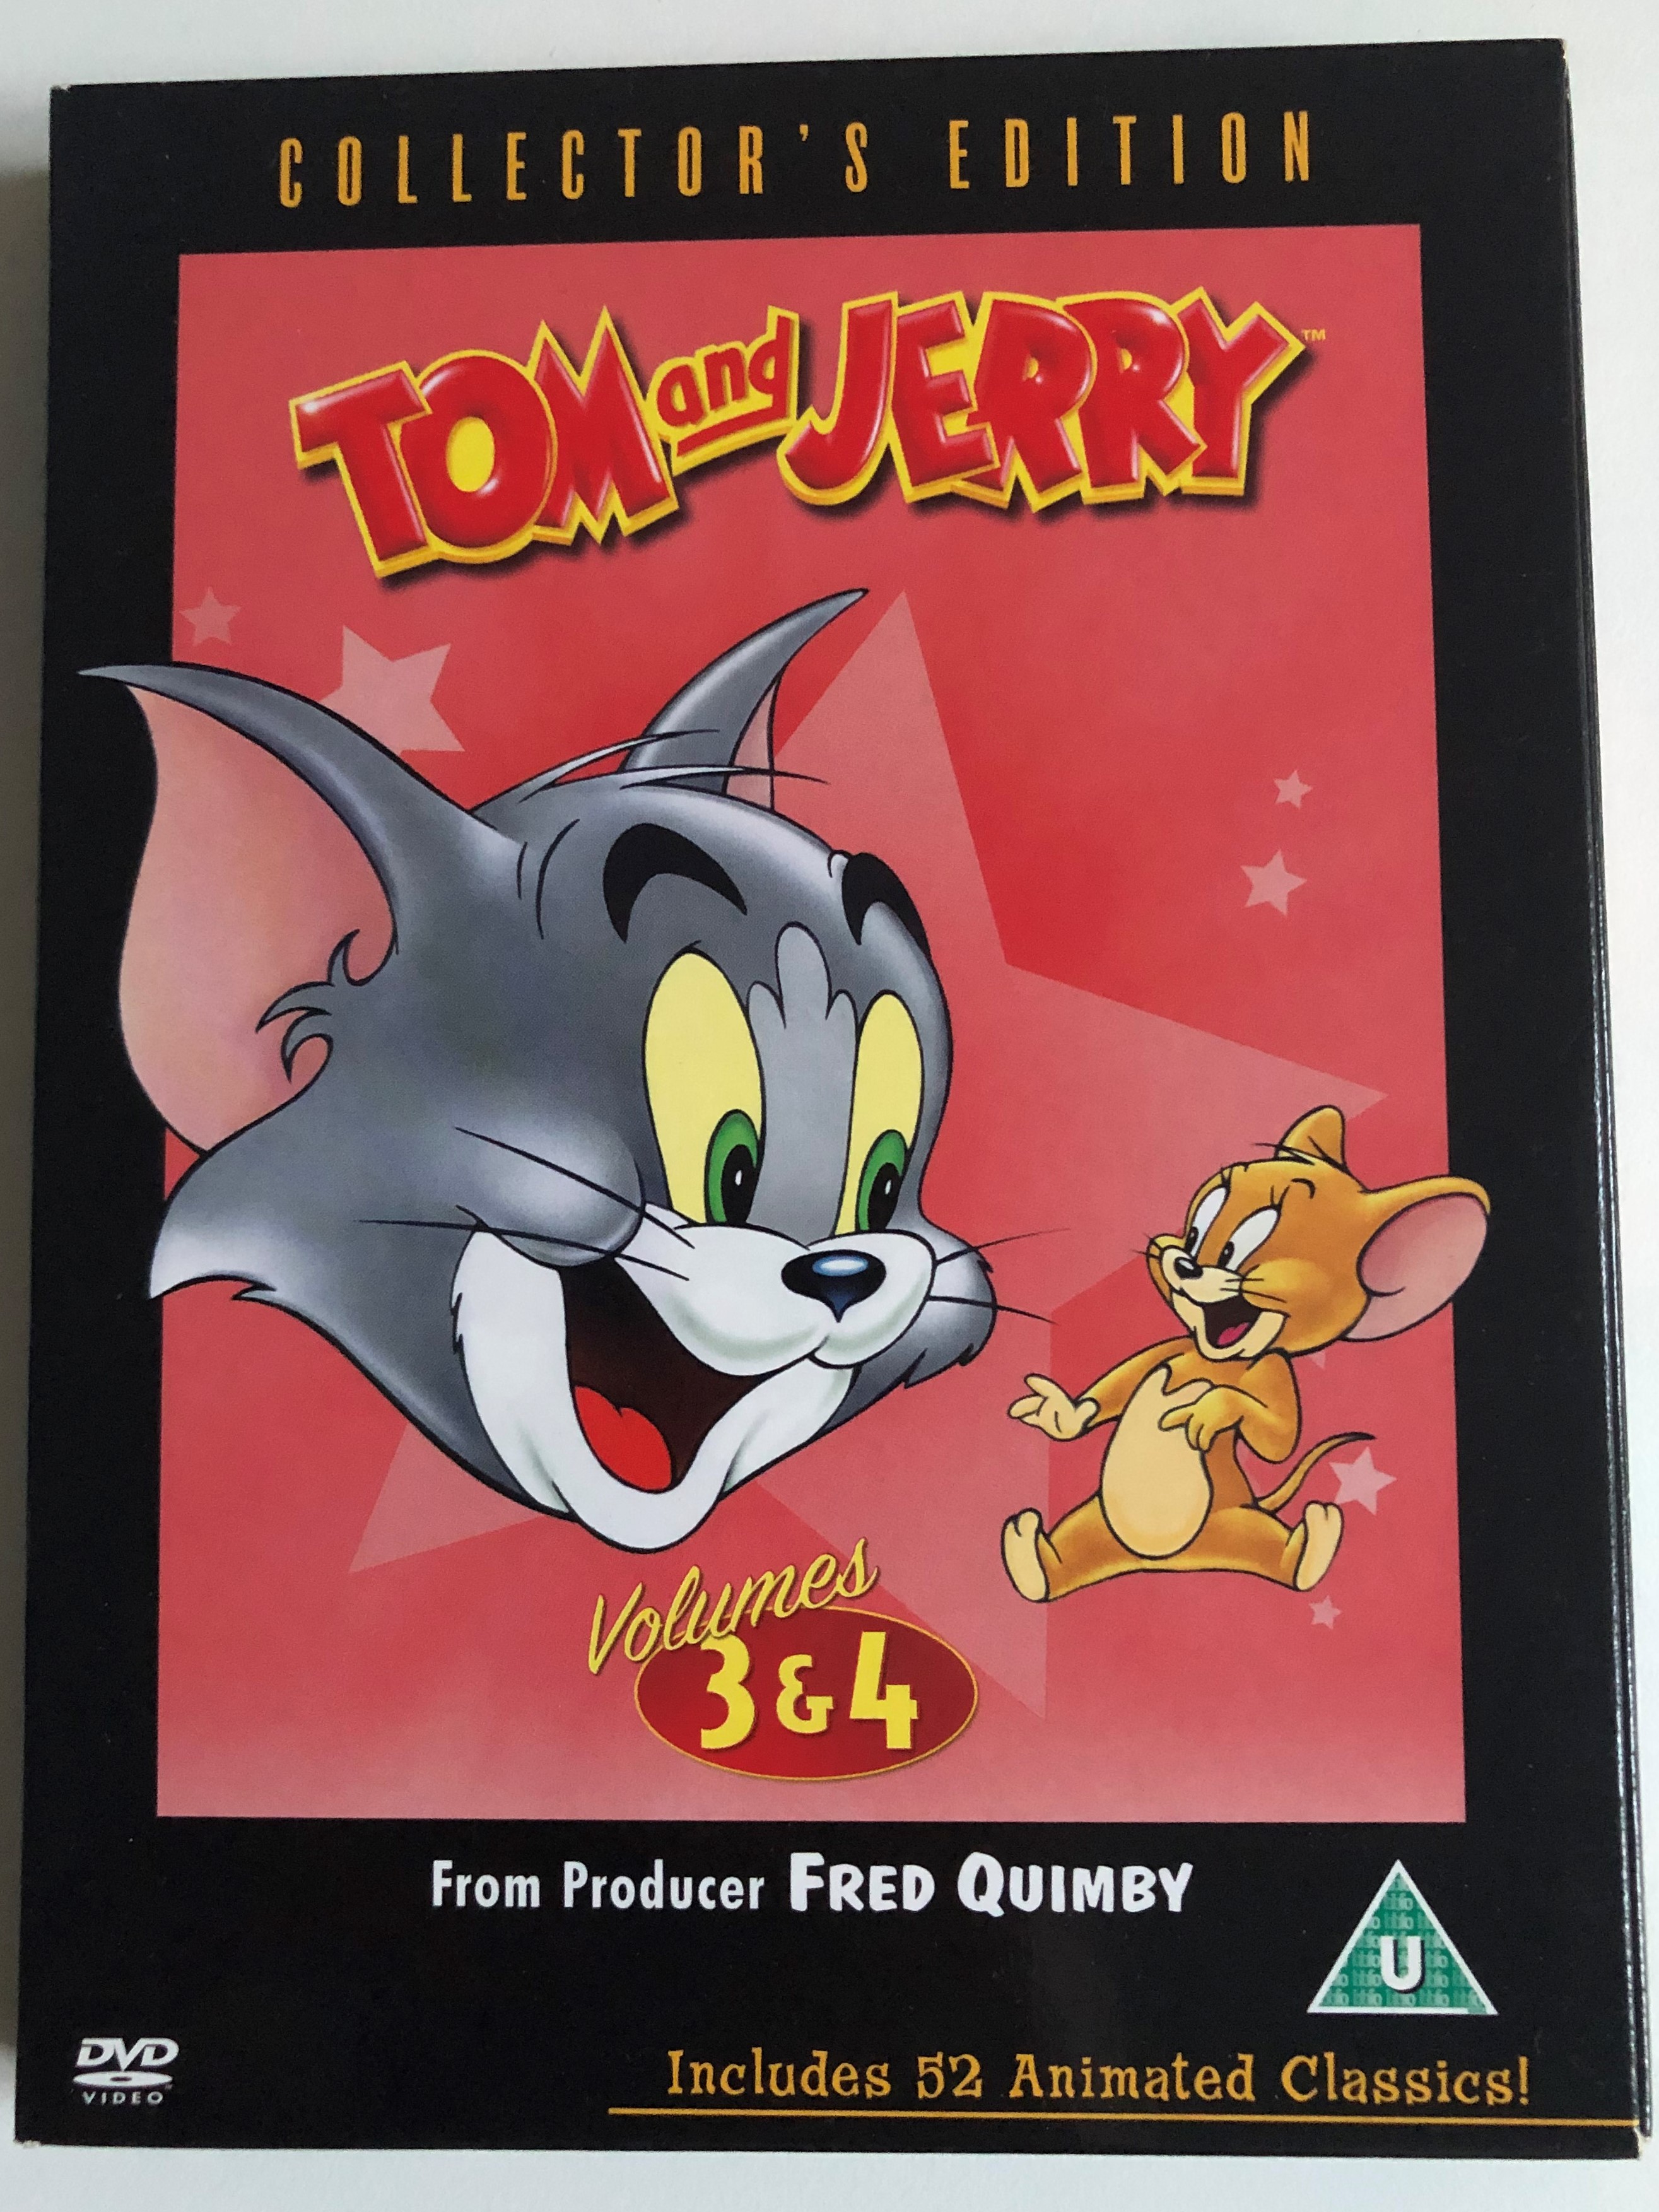 Tom and Jerry - Volumes 3 & 4 DVD Collector's Edition / Directed by William  Hanna, Joseph Barbera / Includes 52 Animated Classics! / Johann Mouse and  The Two Mouseketeers - Bible in My Language